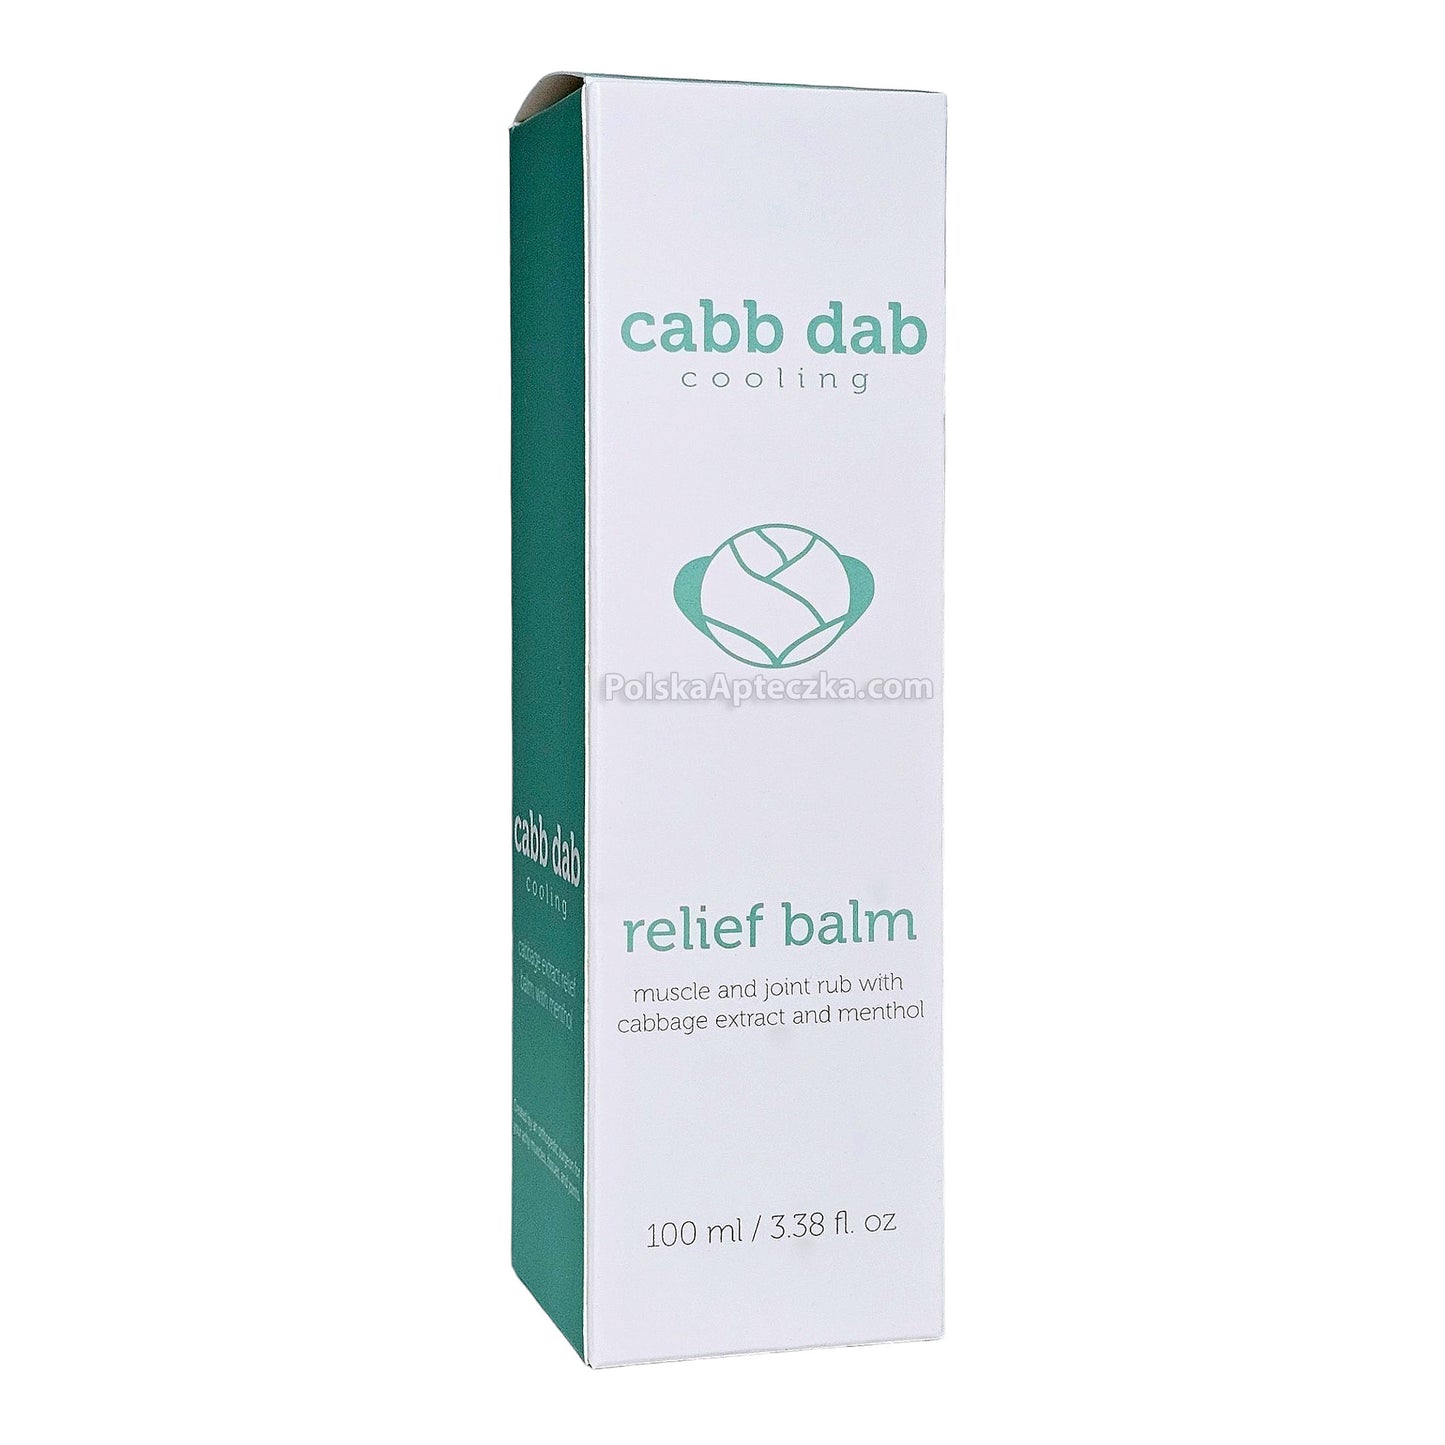 cabb dab cooling relief balm